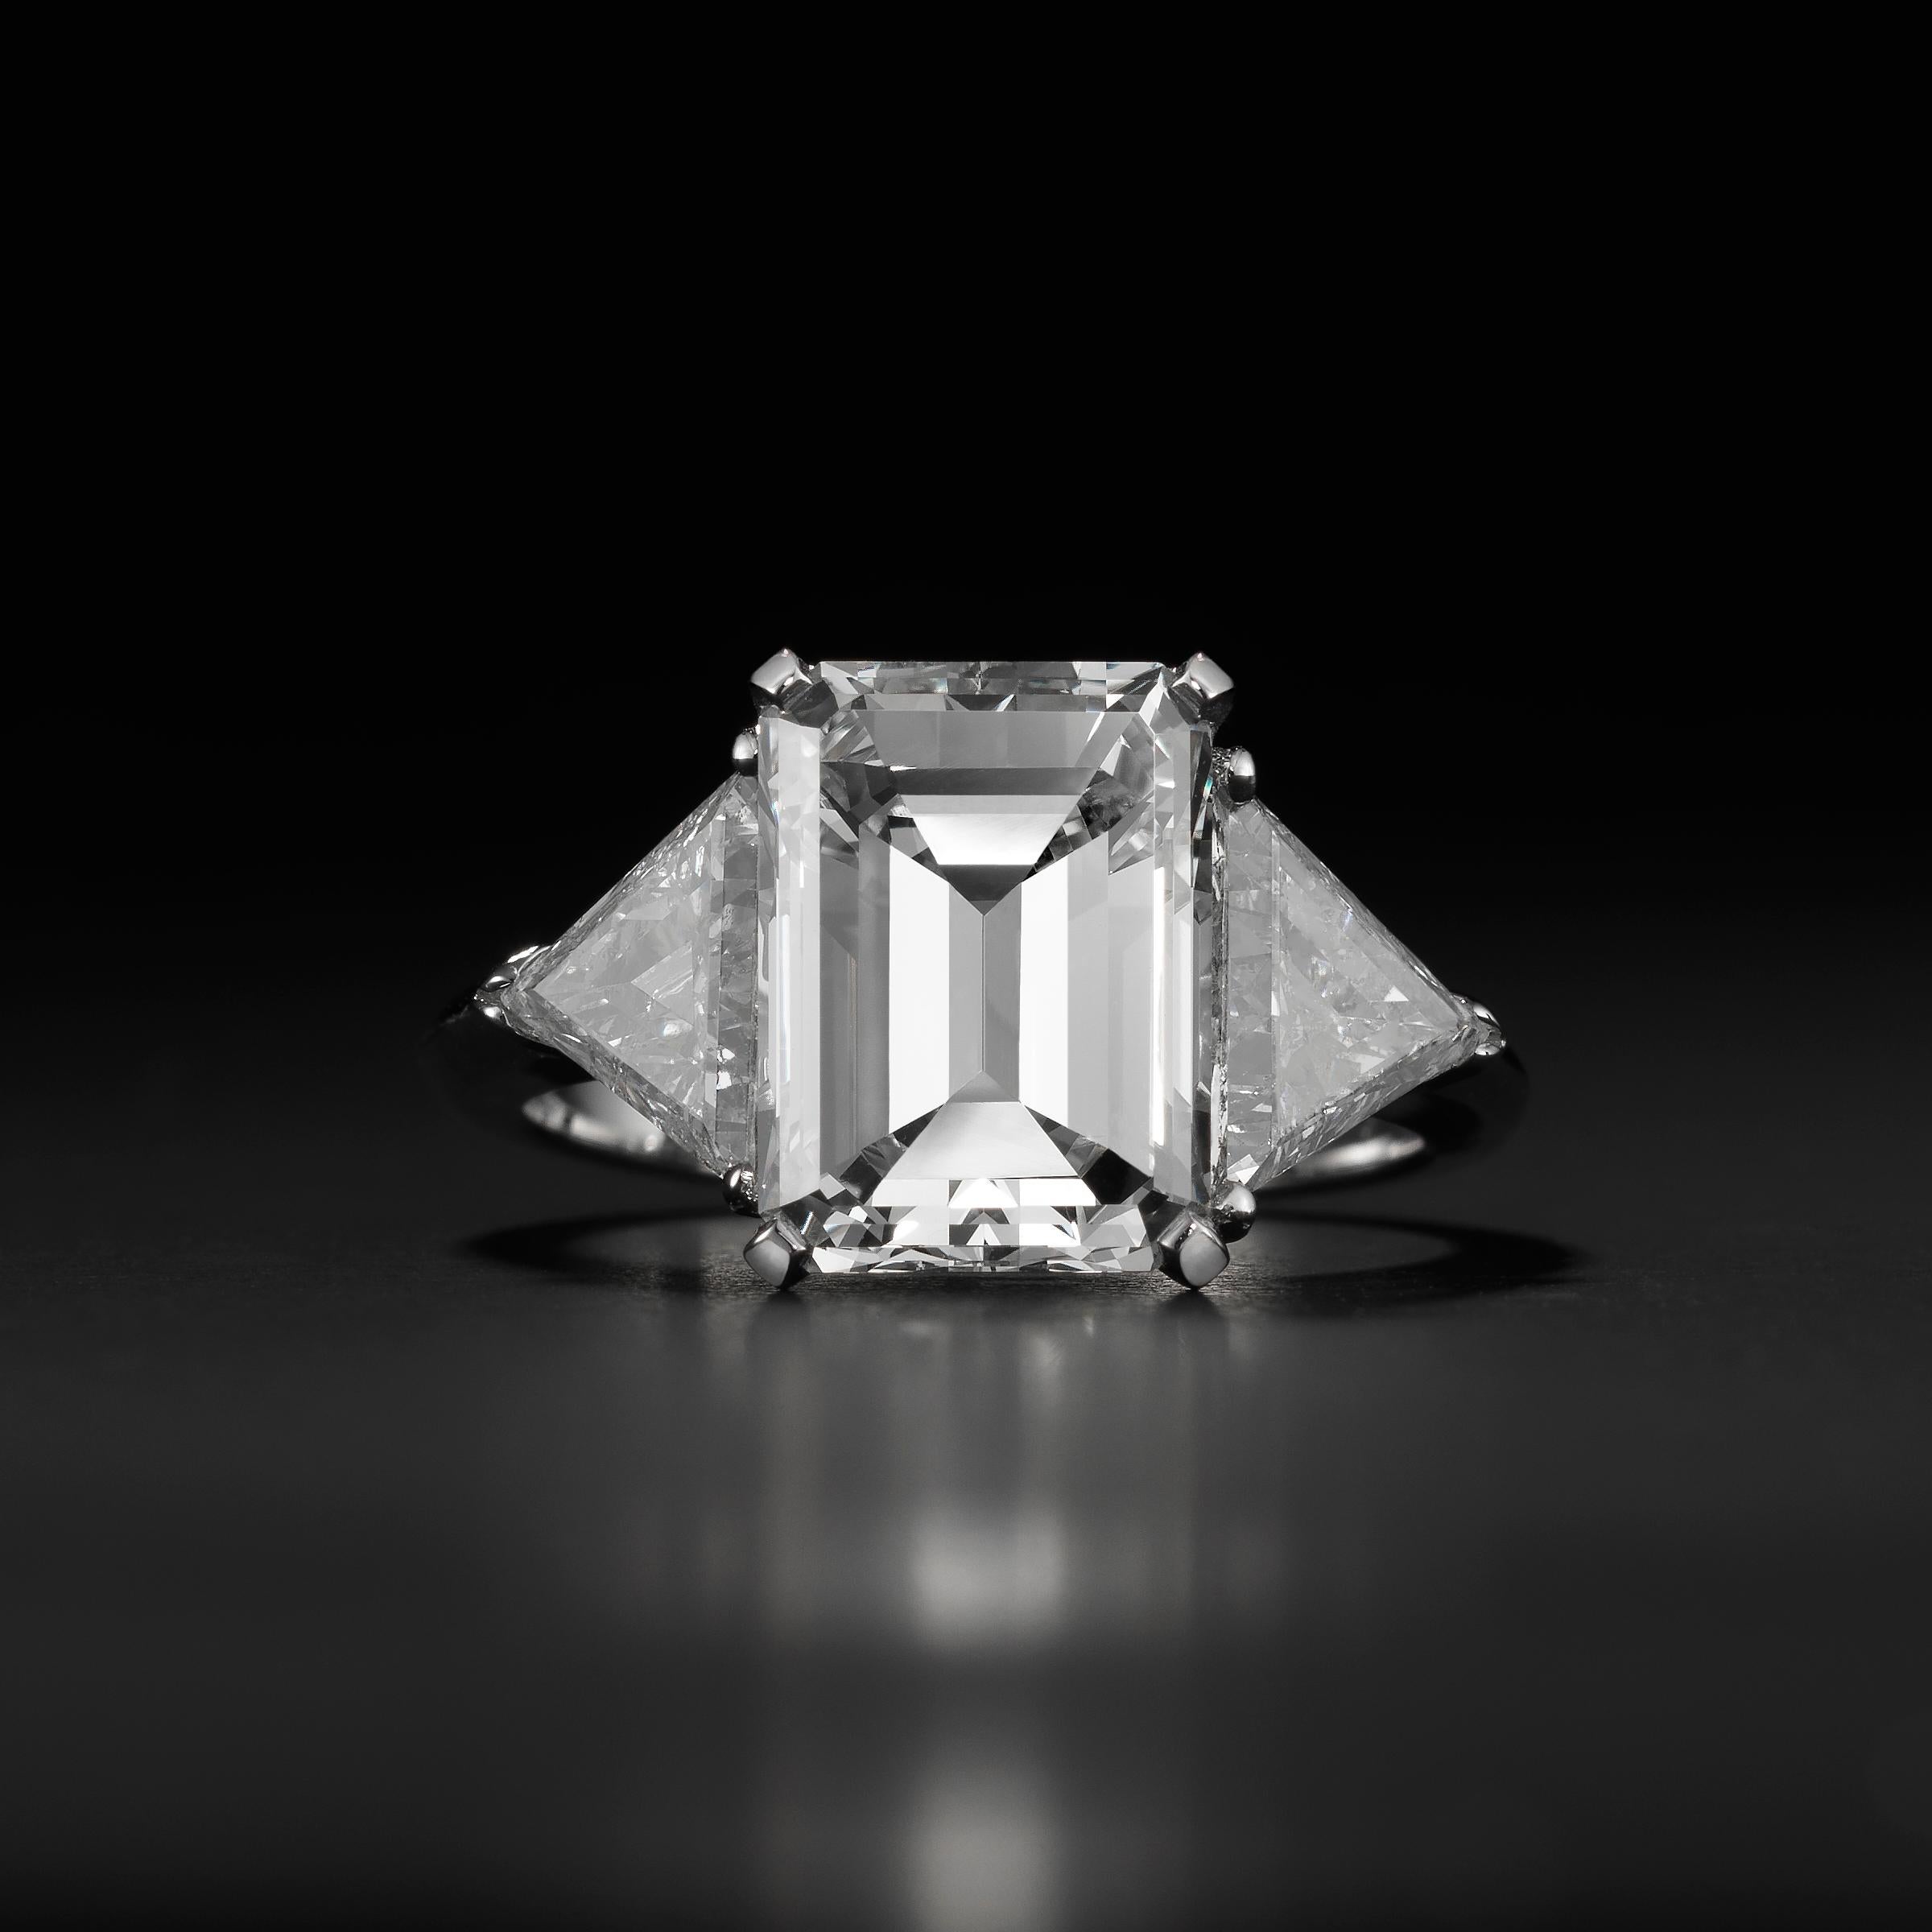 GIA Certified 4.75 carat J VS1 Emerald-Cut Diamond Three-Stone Engagement Ring in Platinum
Classically elegant diamond engagement ring featuring at its center a GIA Certified 4.75 carat emerald-cut diamond of J color and VS1 clarity. Estimated